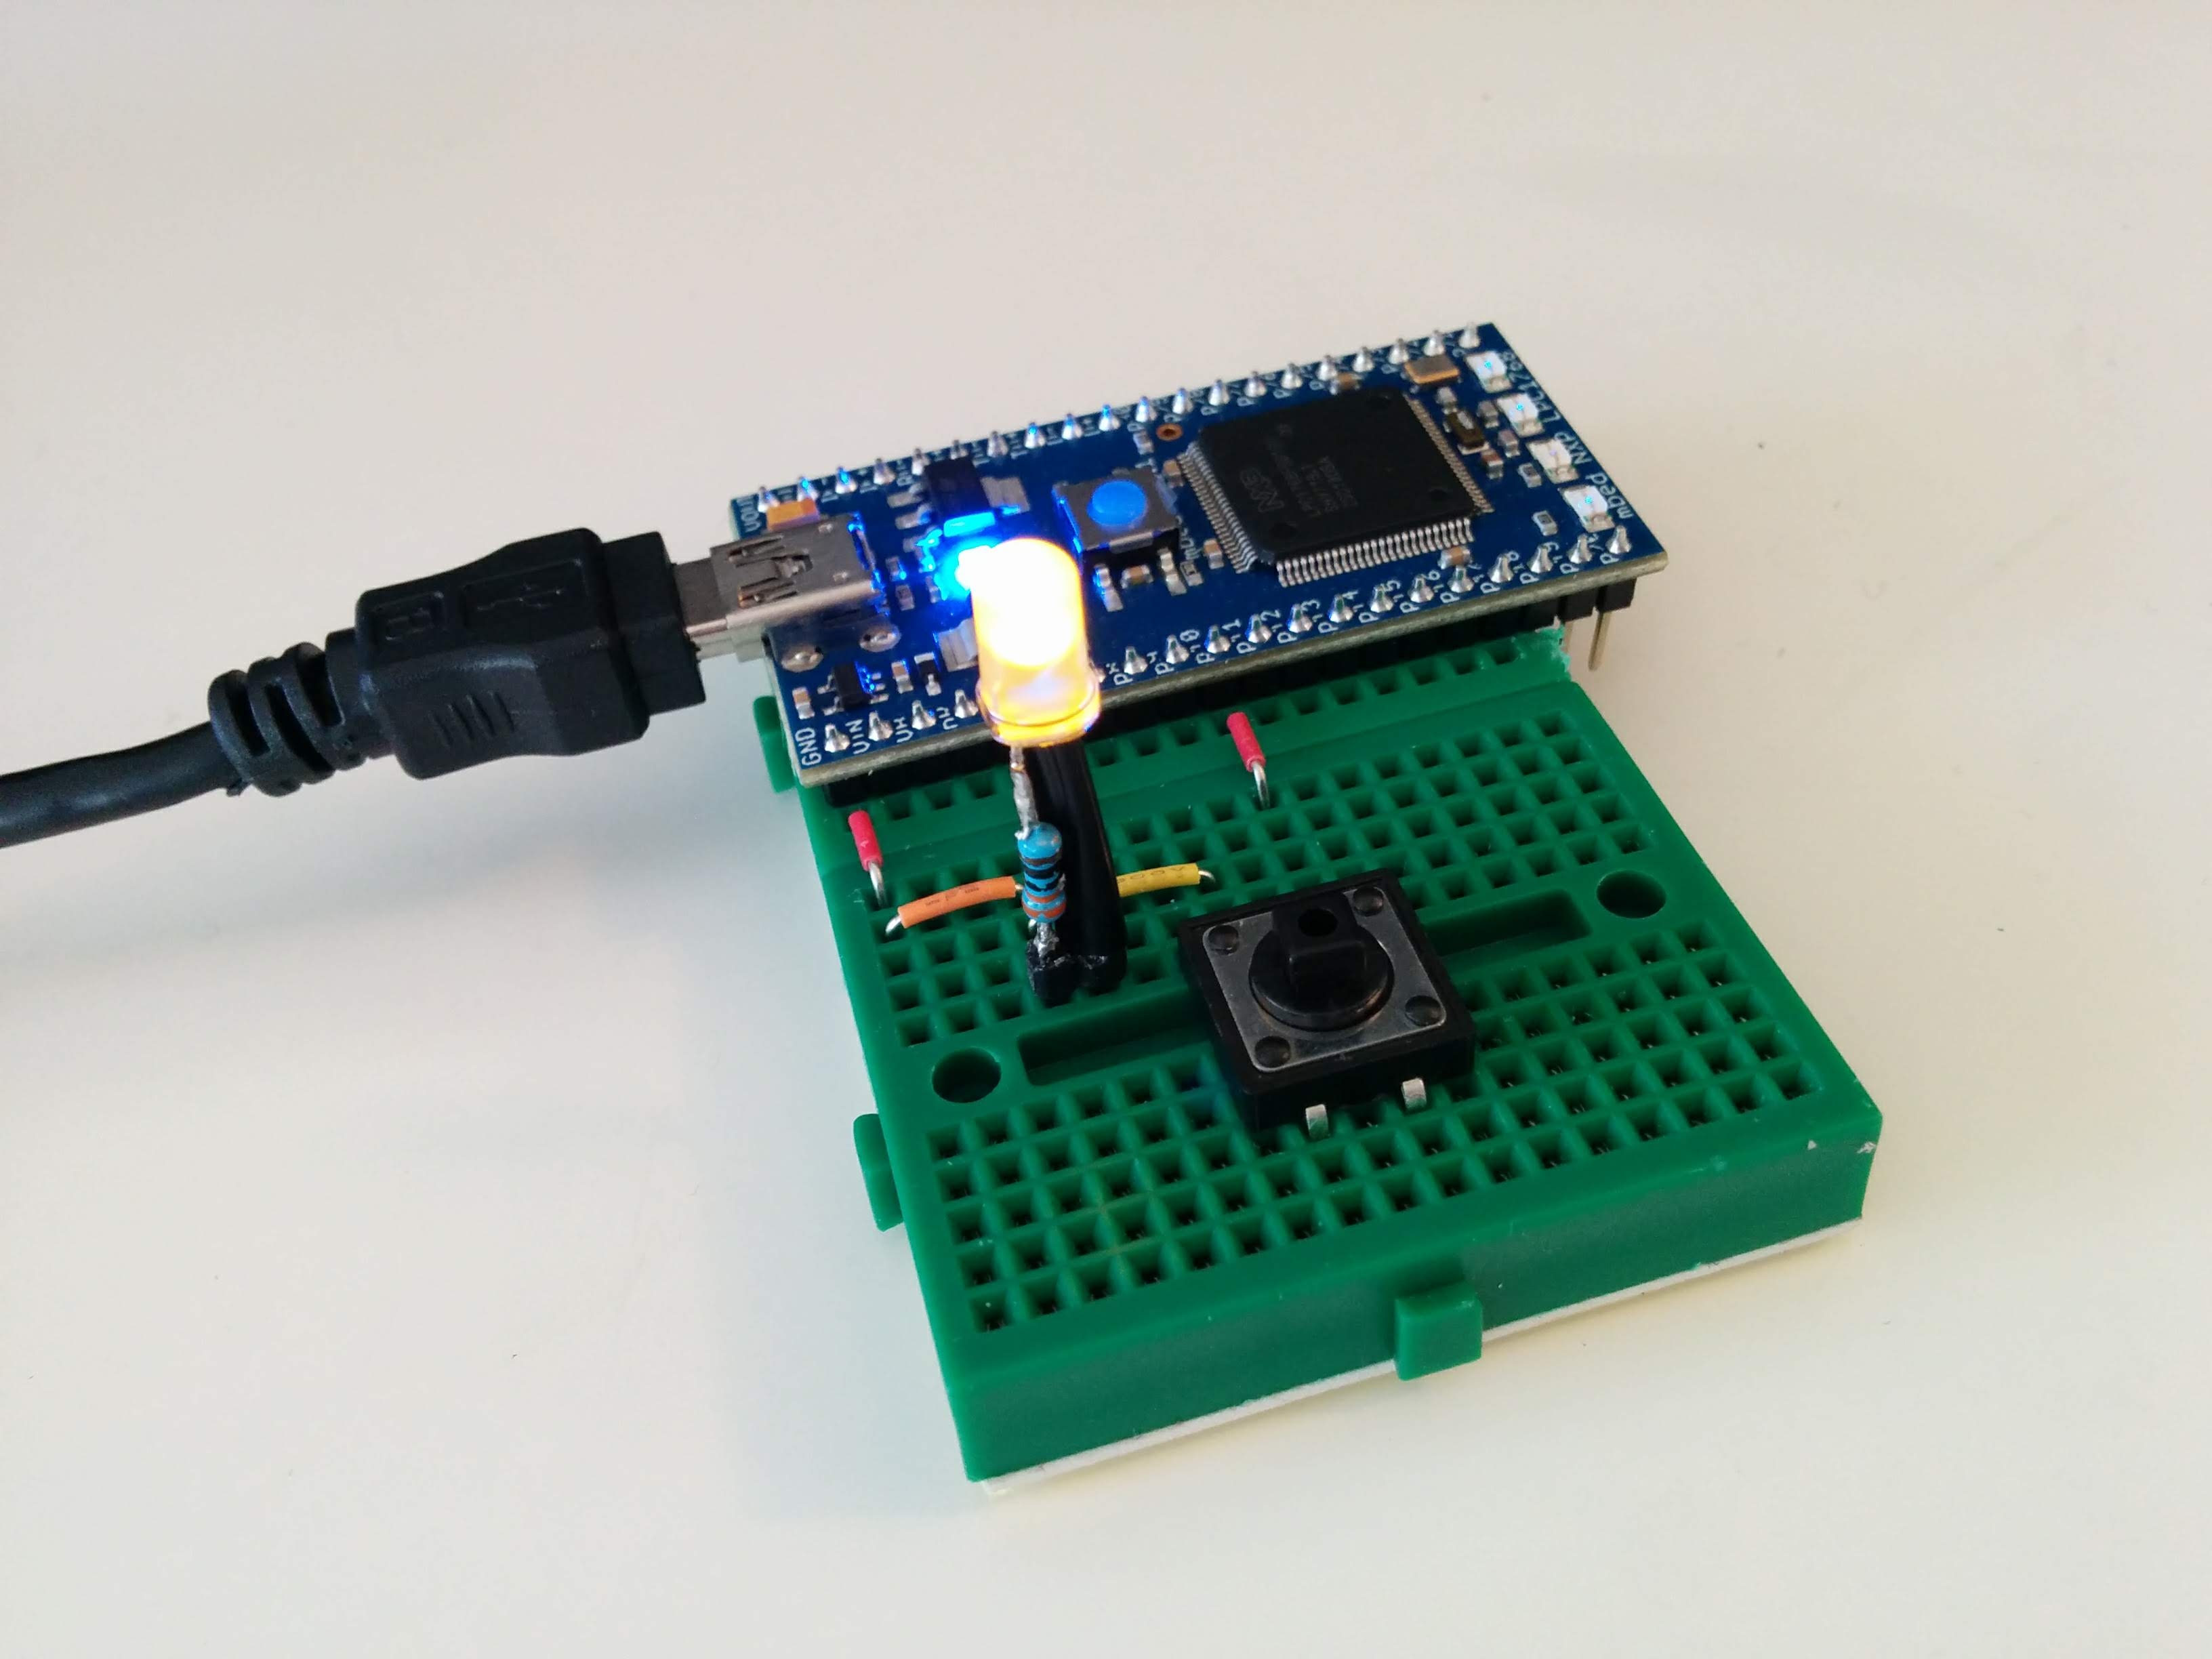 Control LED Using Button on Mbed NXP LPC1768